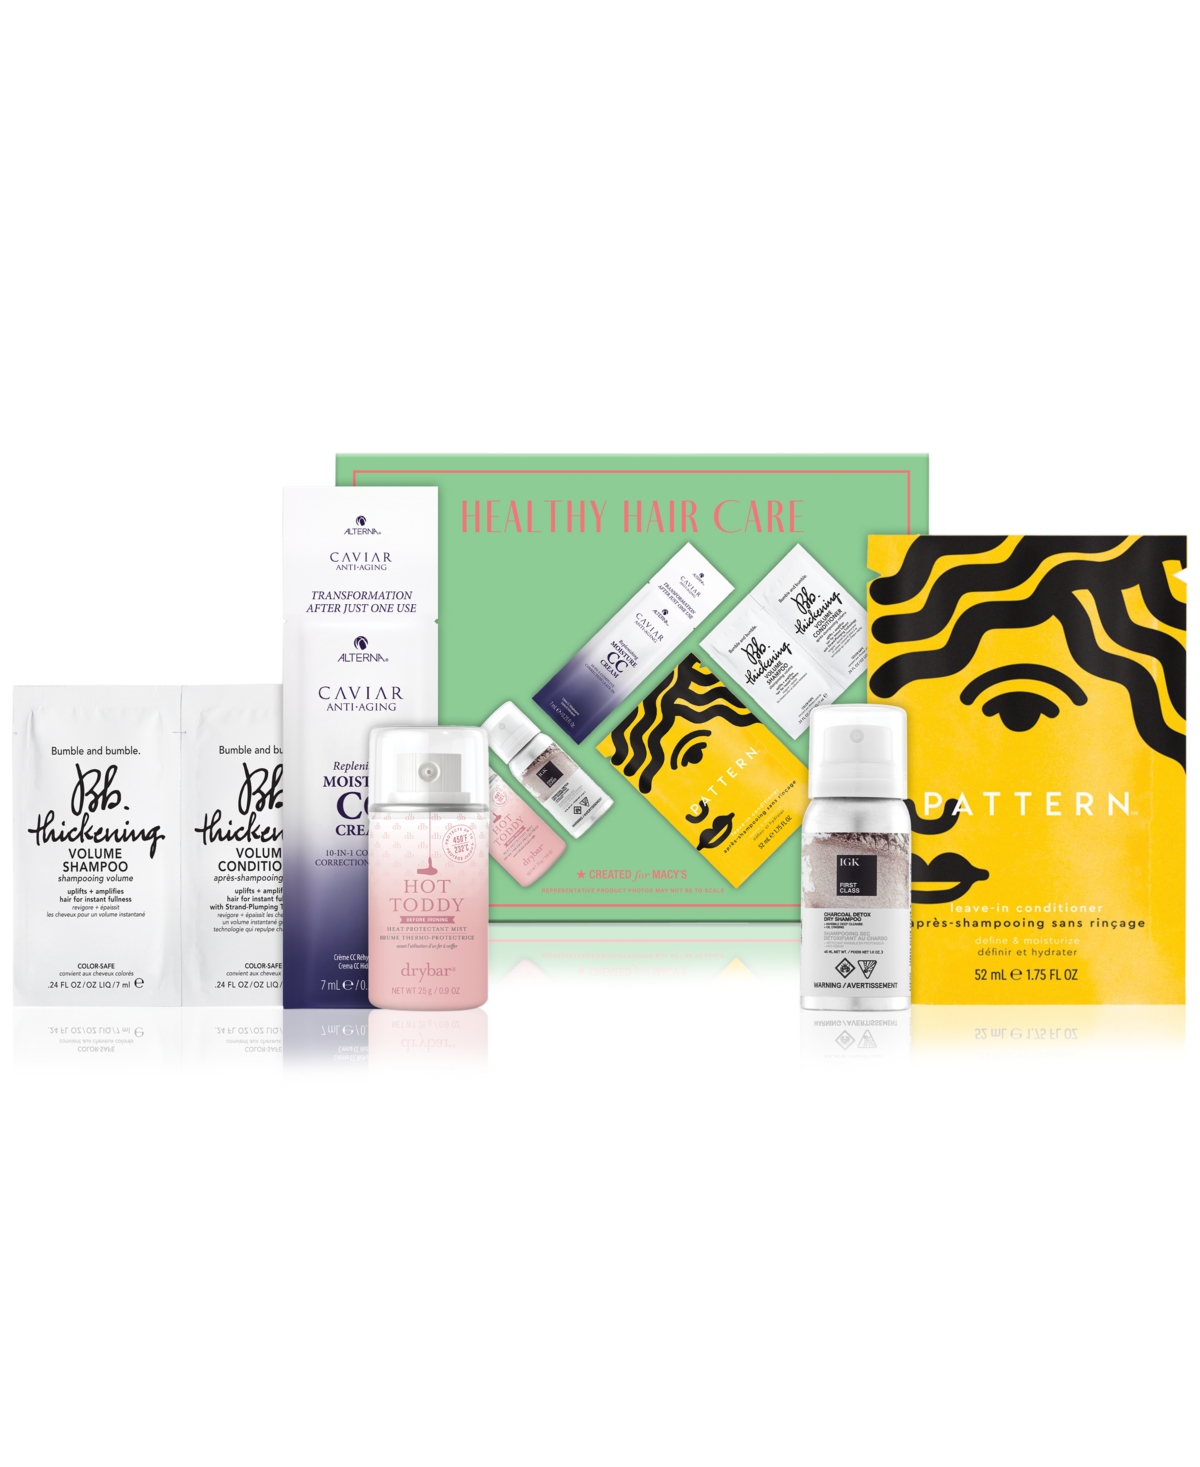 5-Piece Healthy Hair Care Set + $5 Bonus Coupon  $10 + Free Store Pickup at Macy's or F/S on $25+